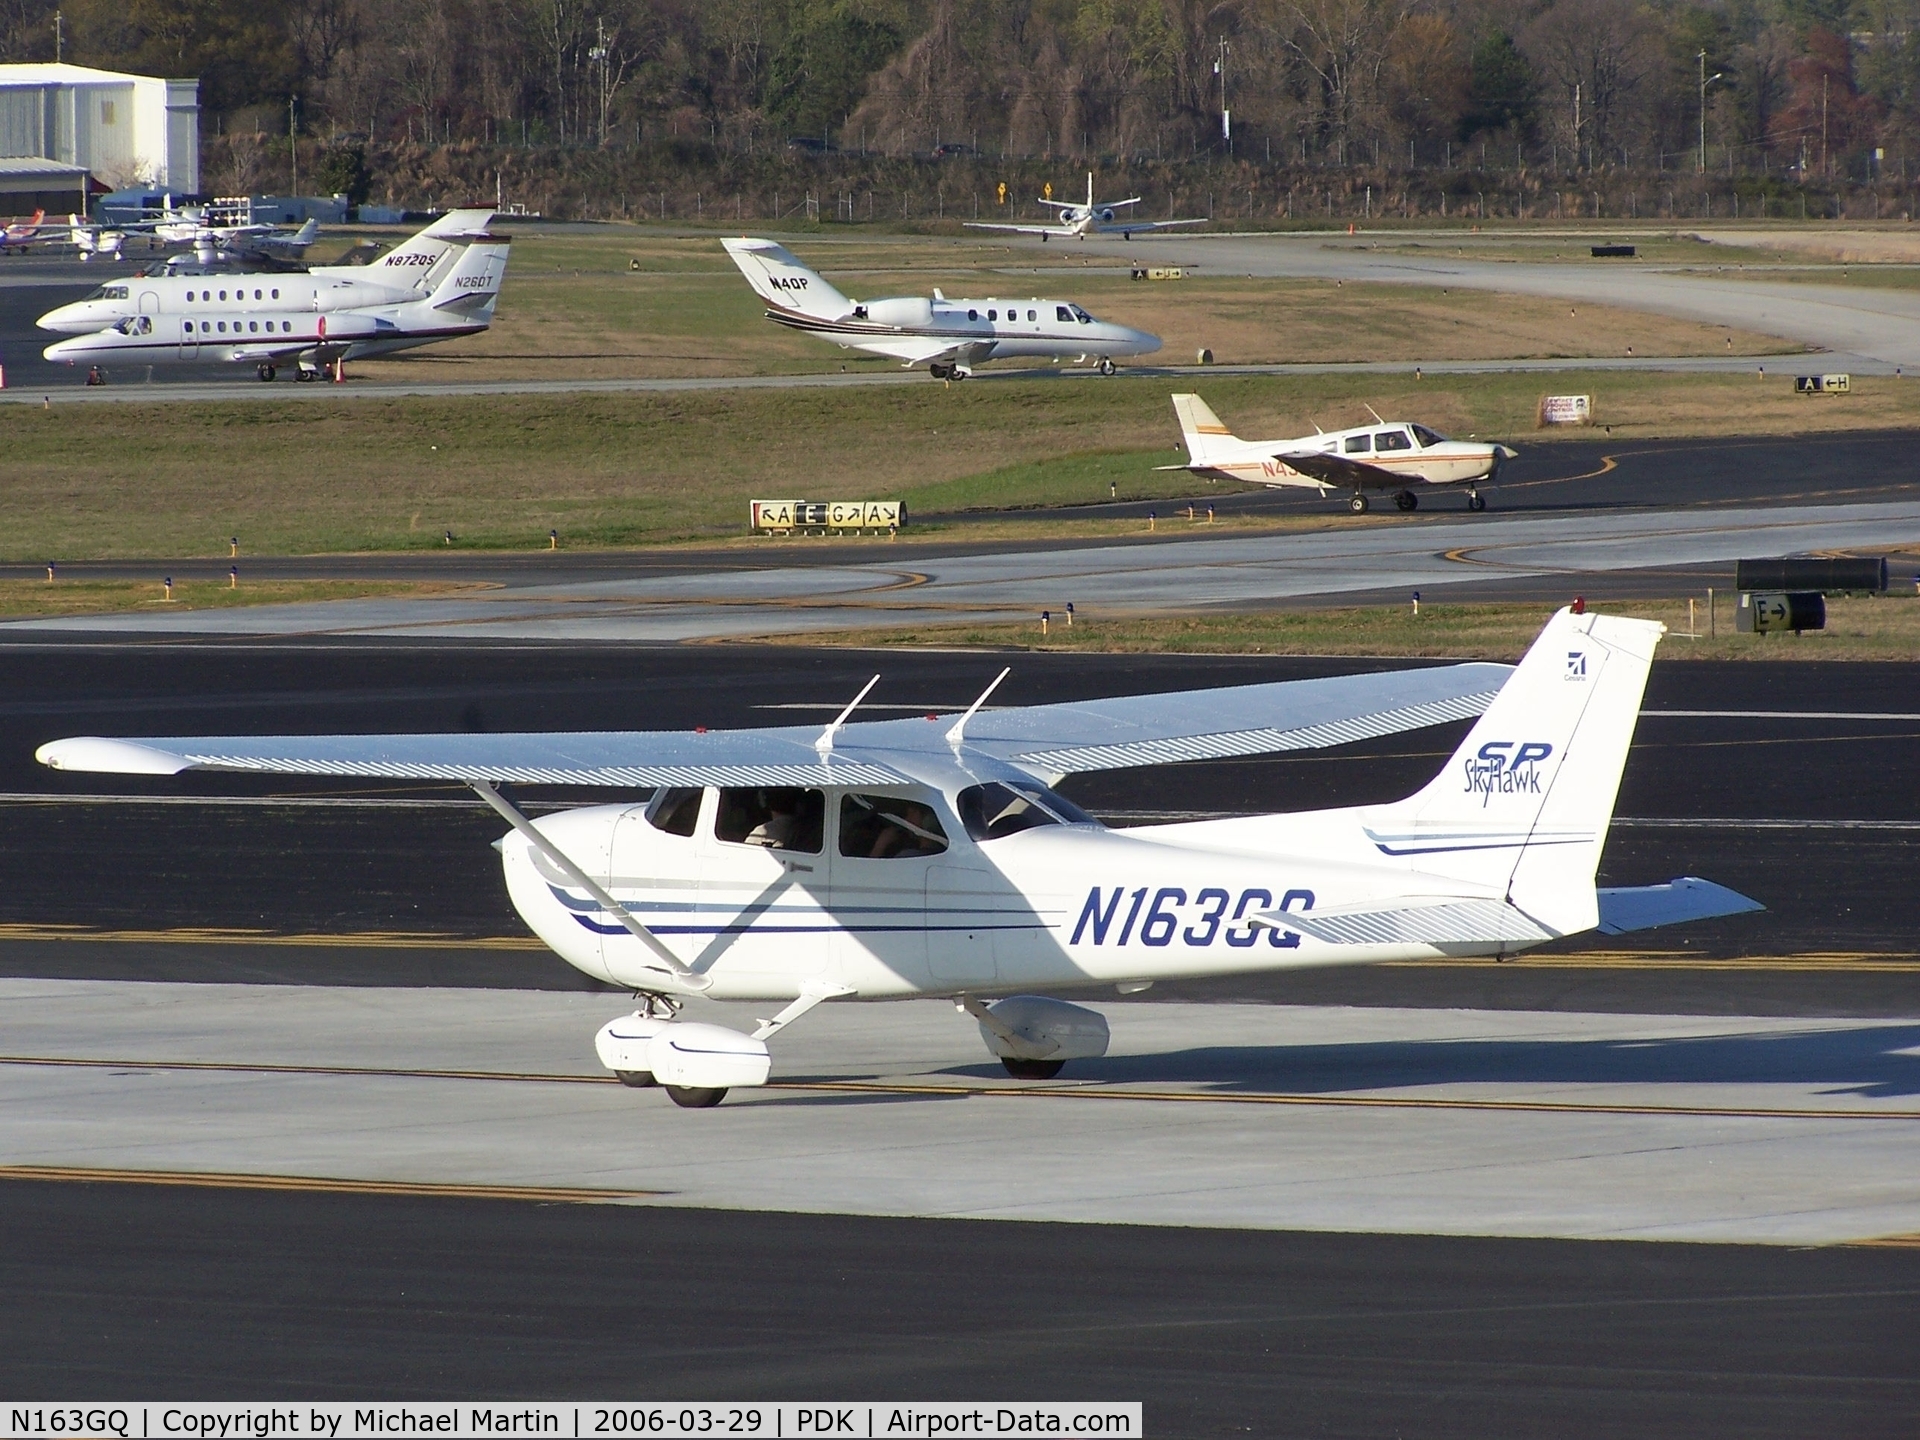 N163GQ, 2003 Cessna 172S C/N 172S9566, Taxing back from flight